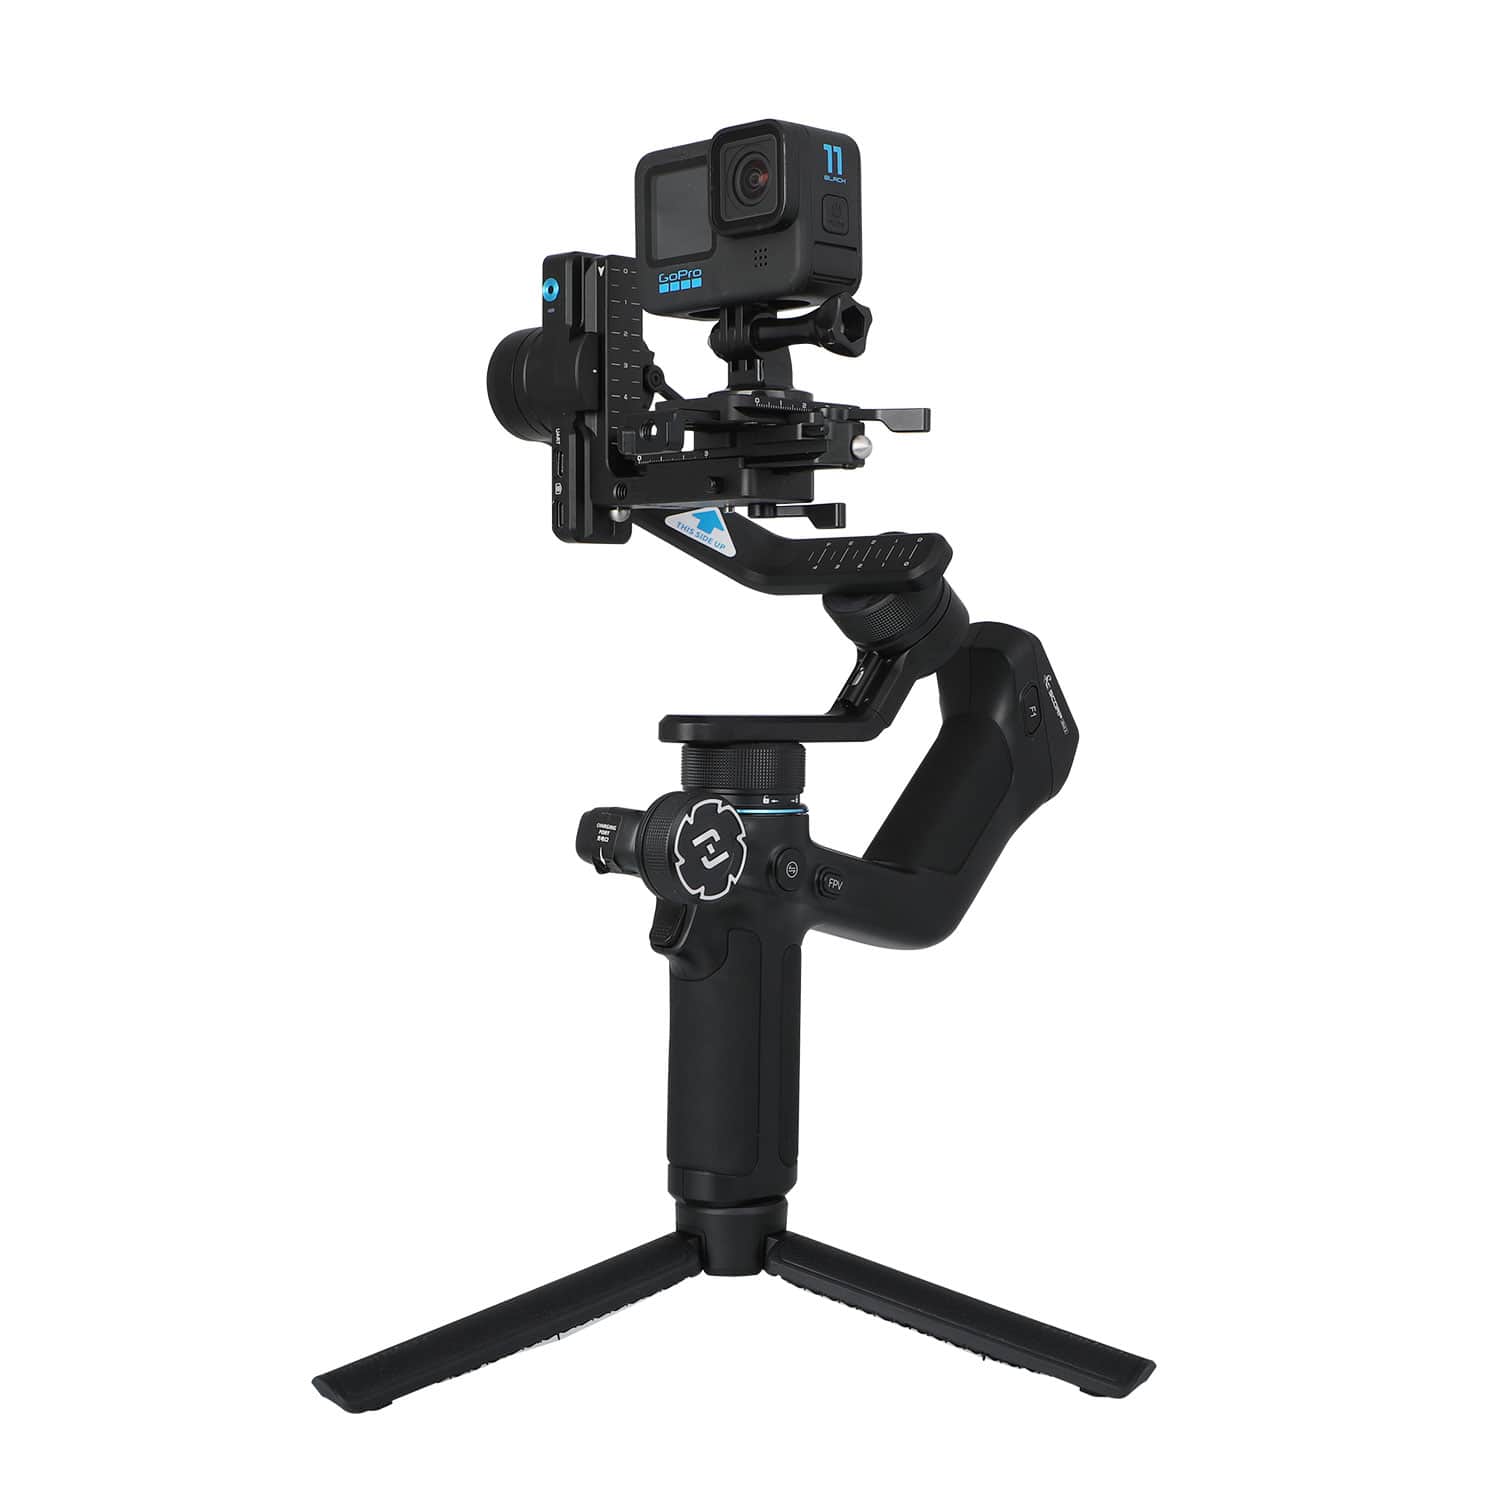 Scorp Mini 2 all-in-one gimbal with built-in AI tracking module